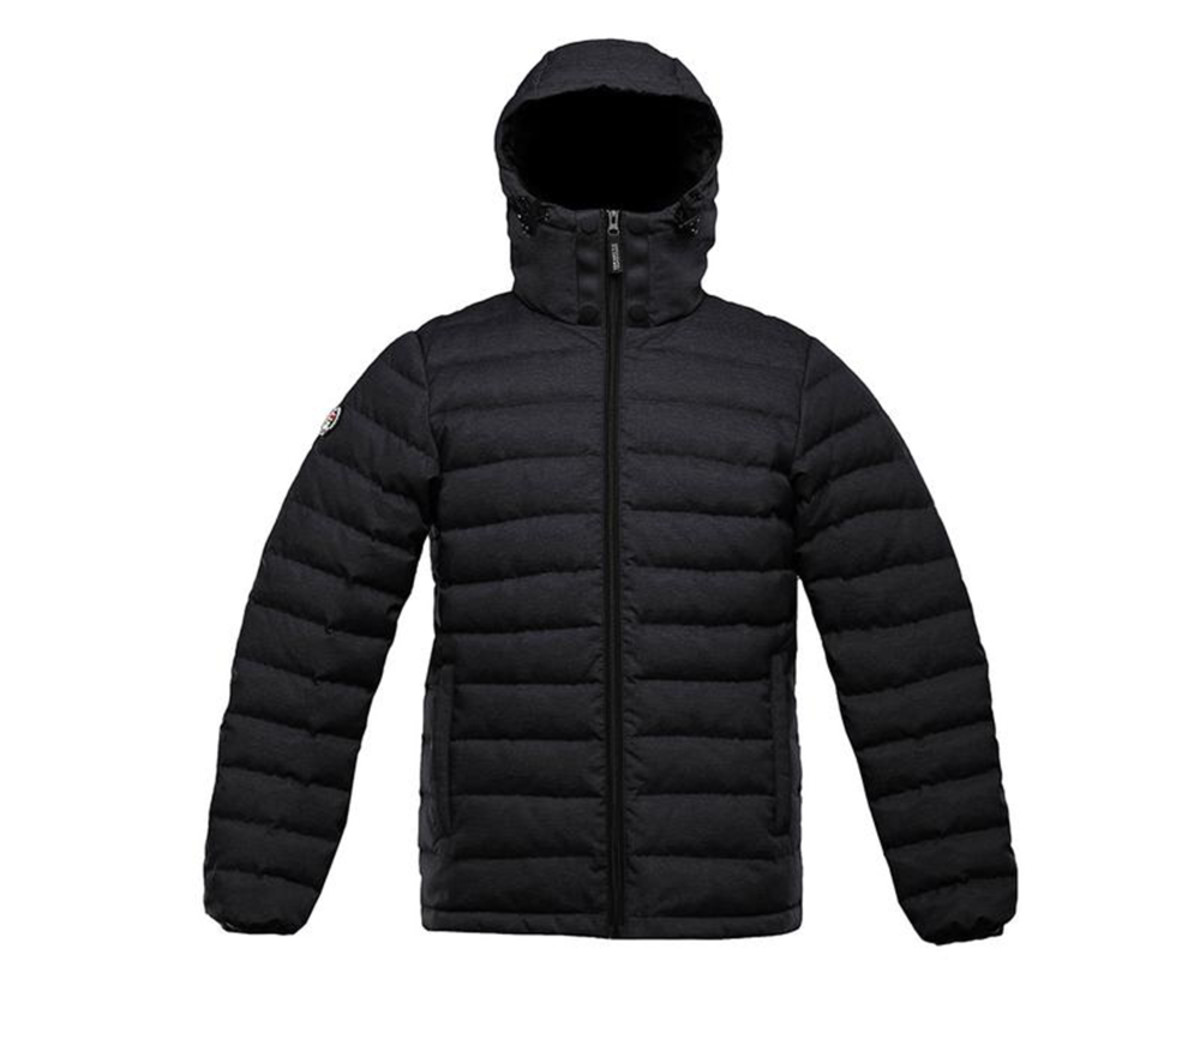 Triple F.A.T. Goose Might Just Be Your New Favorite Coat | Men's ...